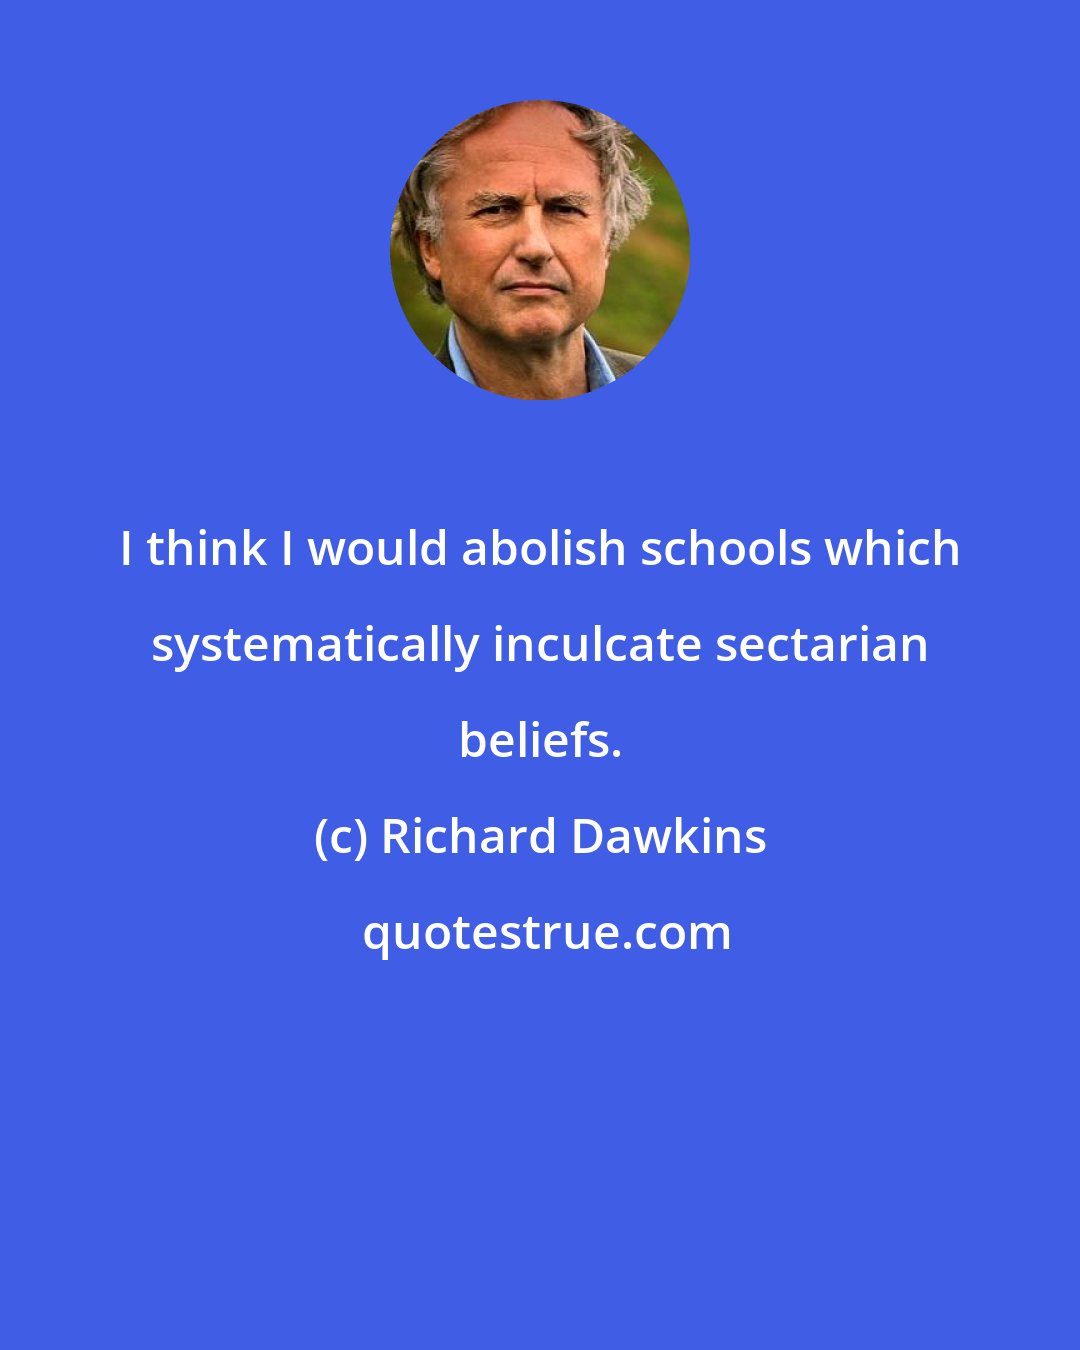 Richard Dawkins: I think I would abolish schools which systematically inculcate sectarian beliefs.